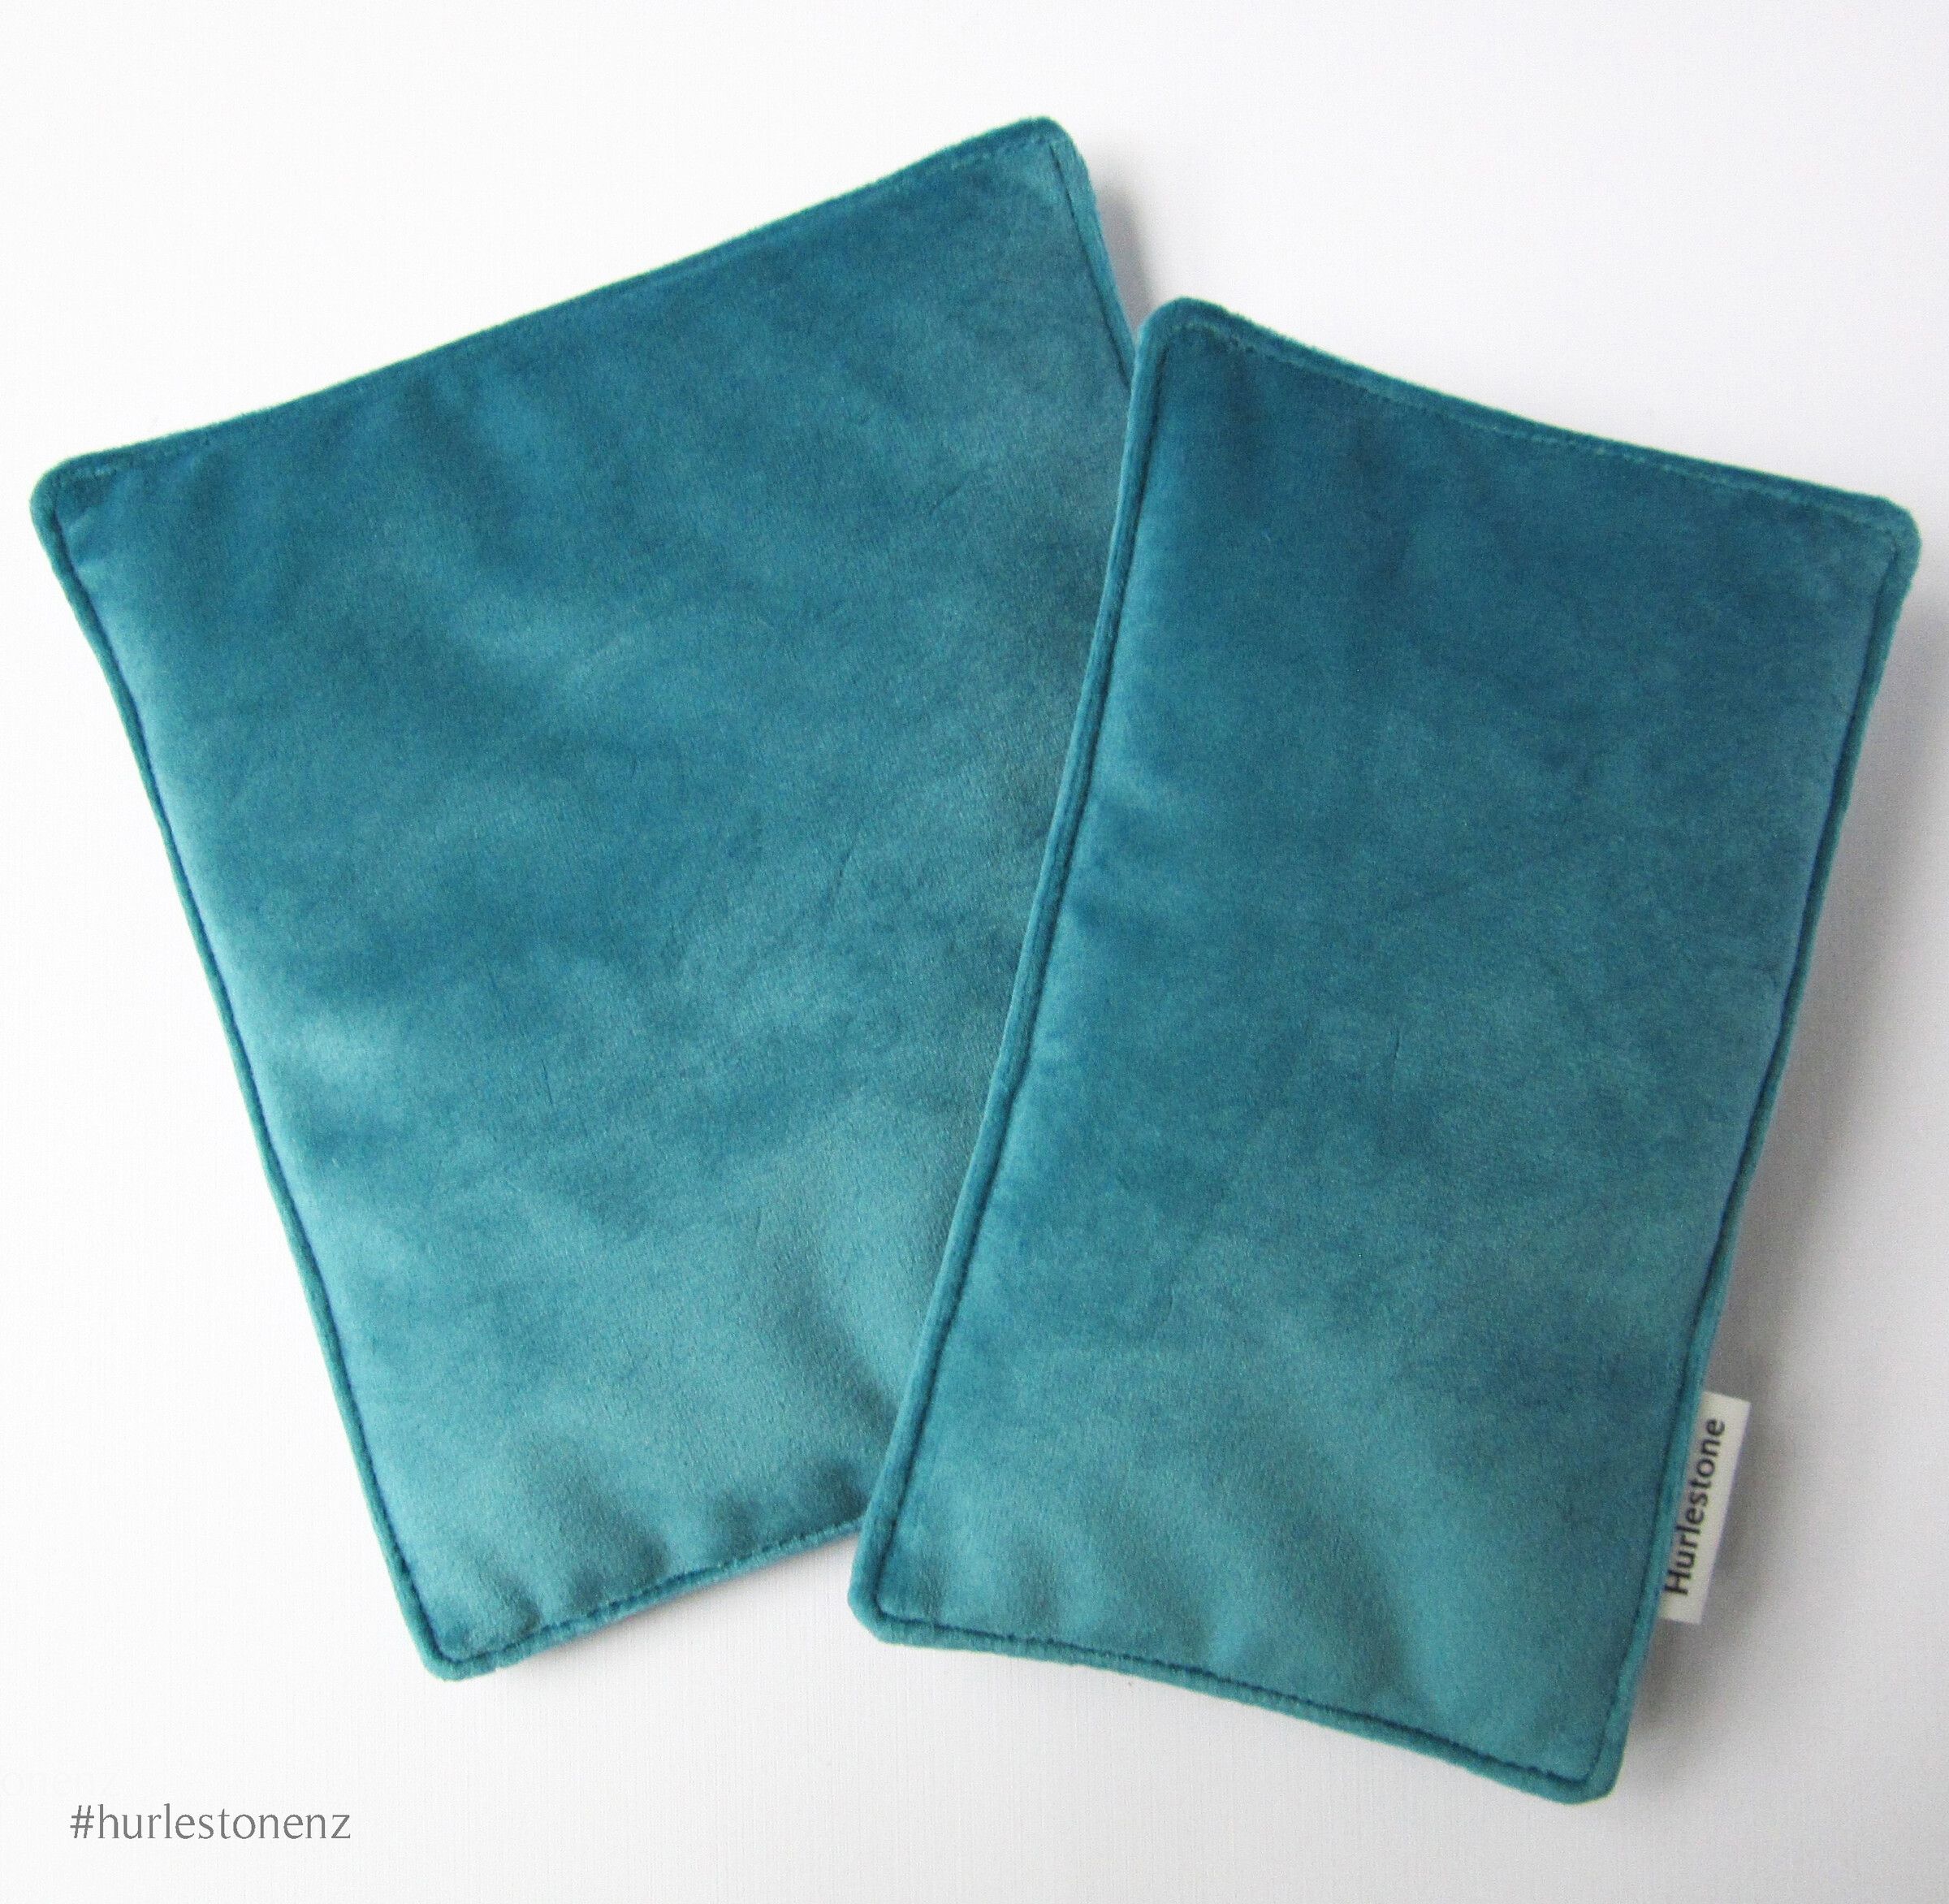 Turquoise Pen Pillow - Small/Large from NZ$16.00